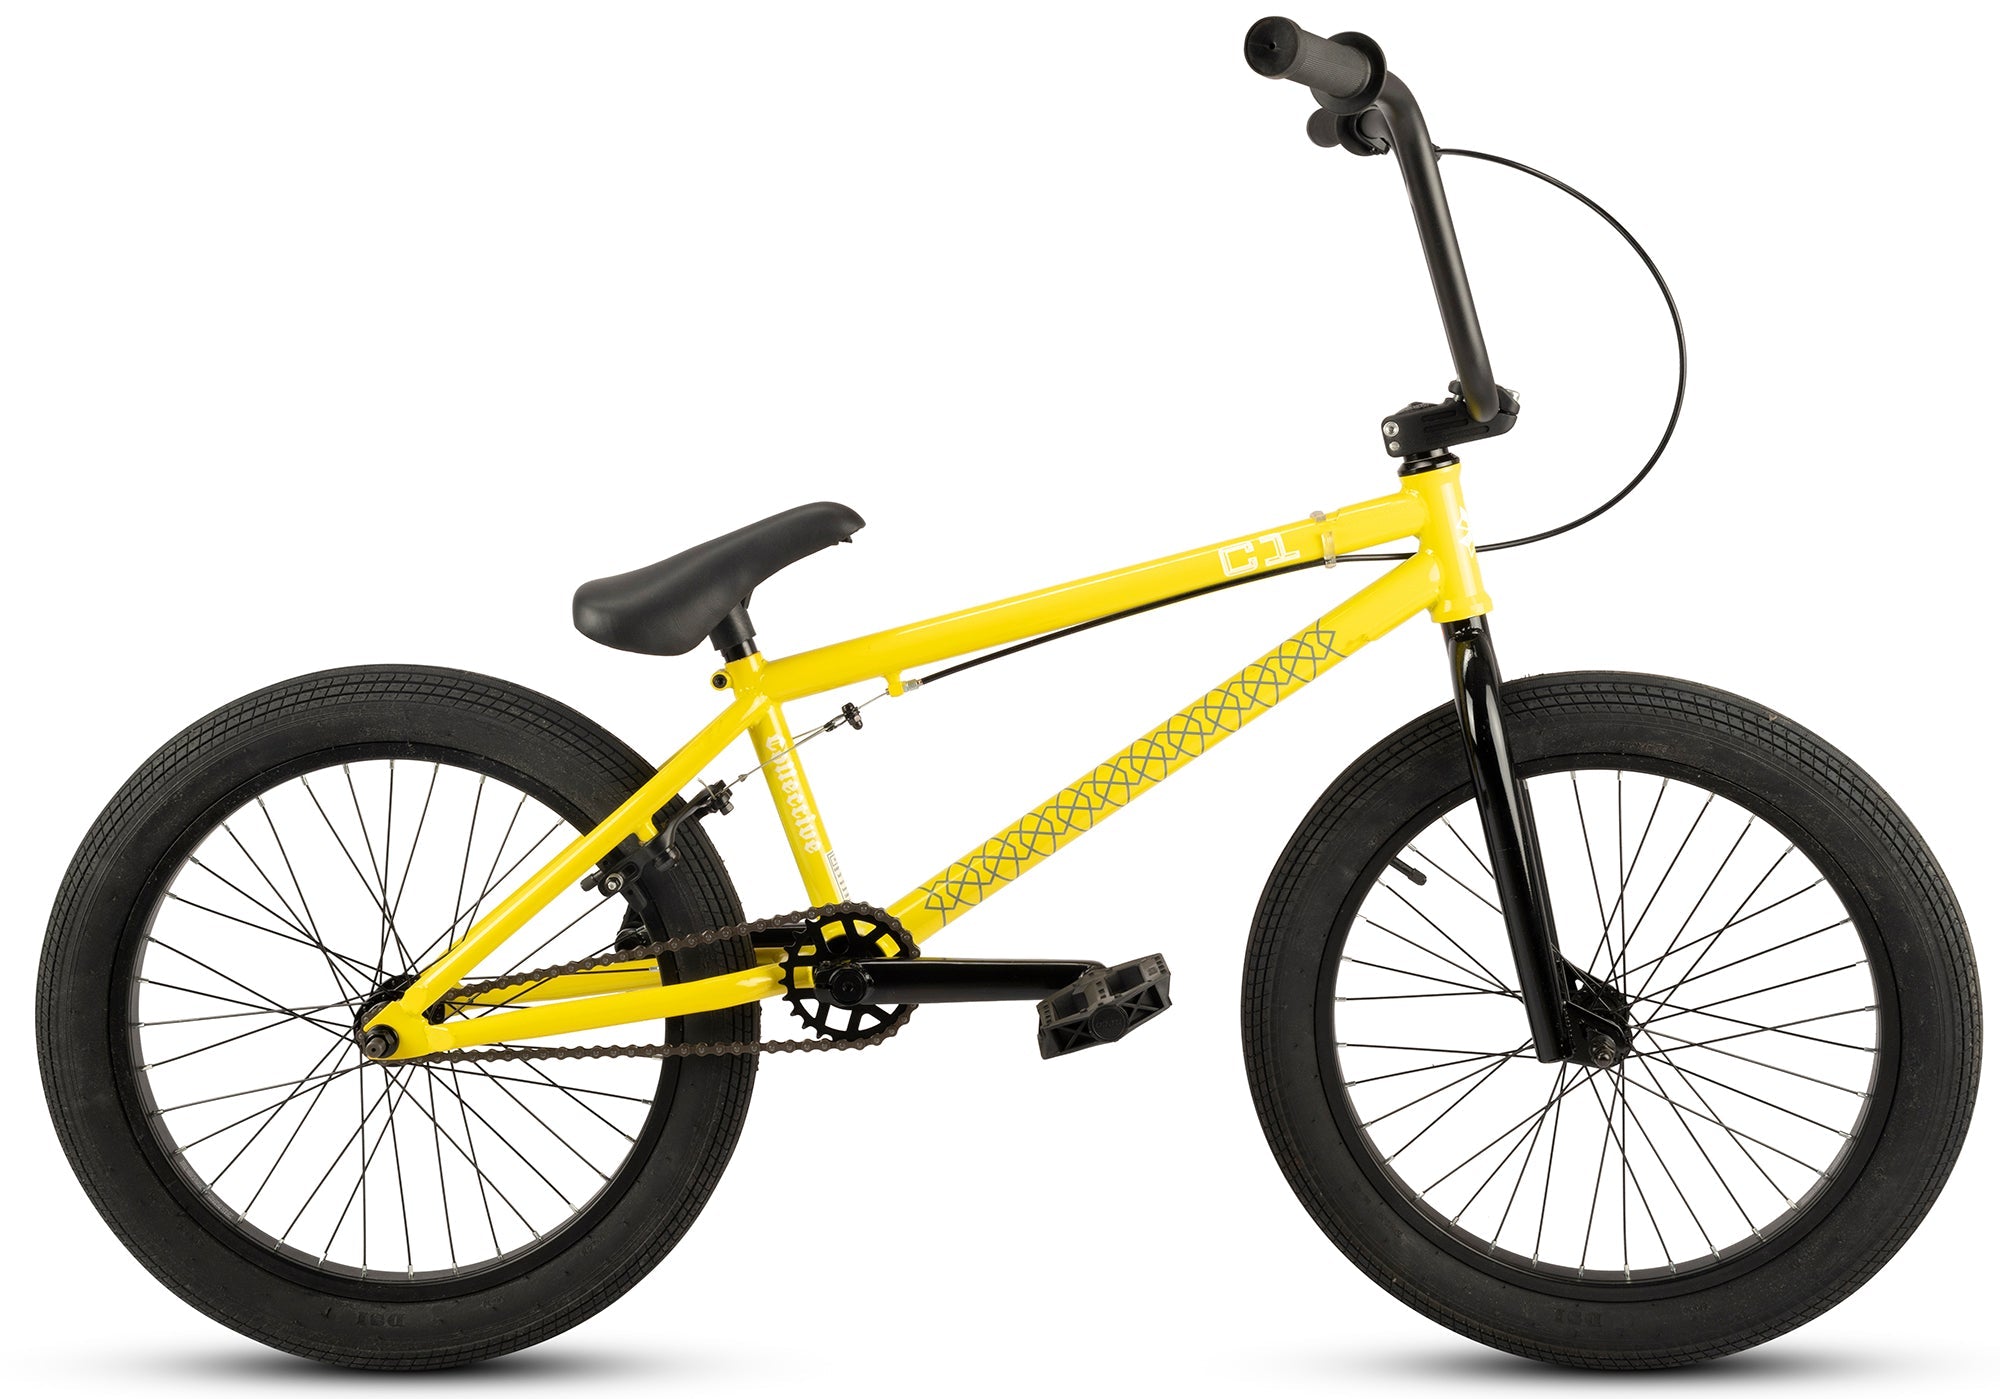 Collective C1 Complete BMX Yellow - Collective Bikes